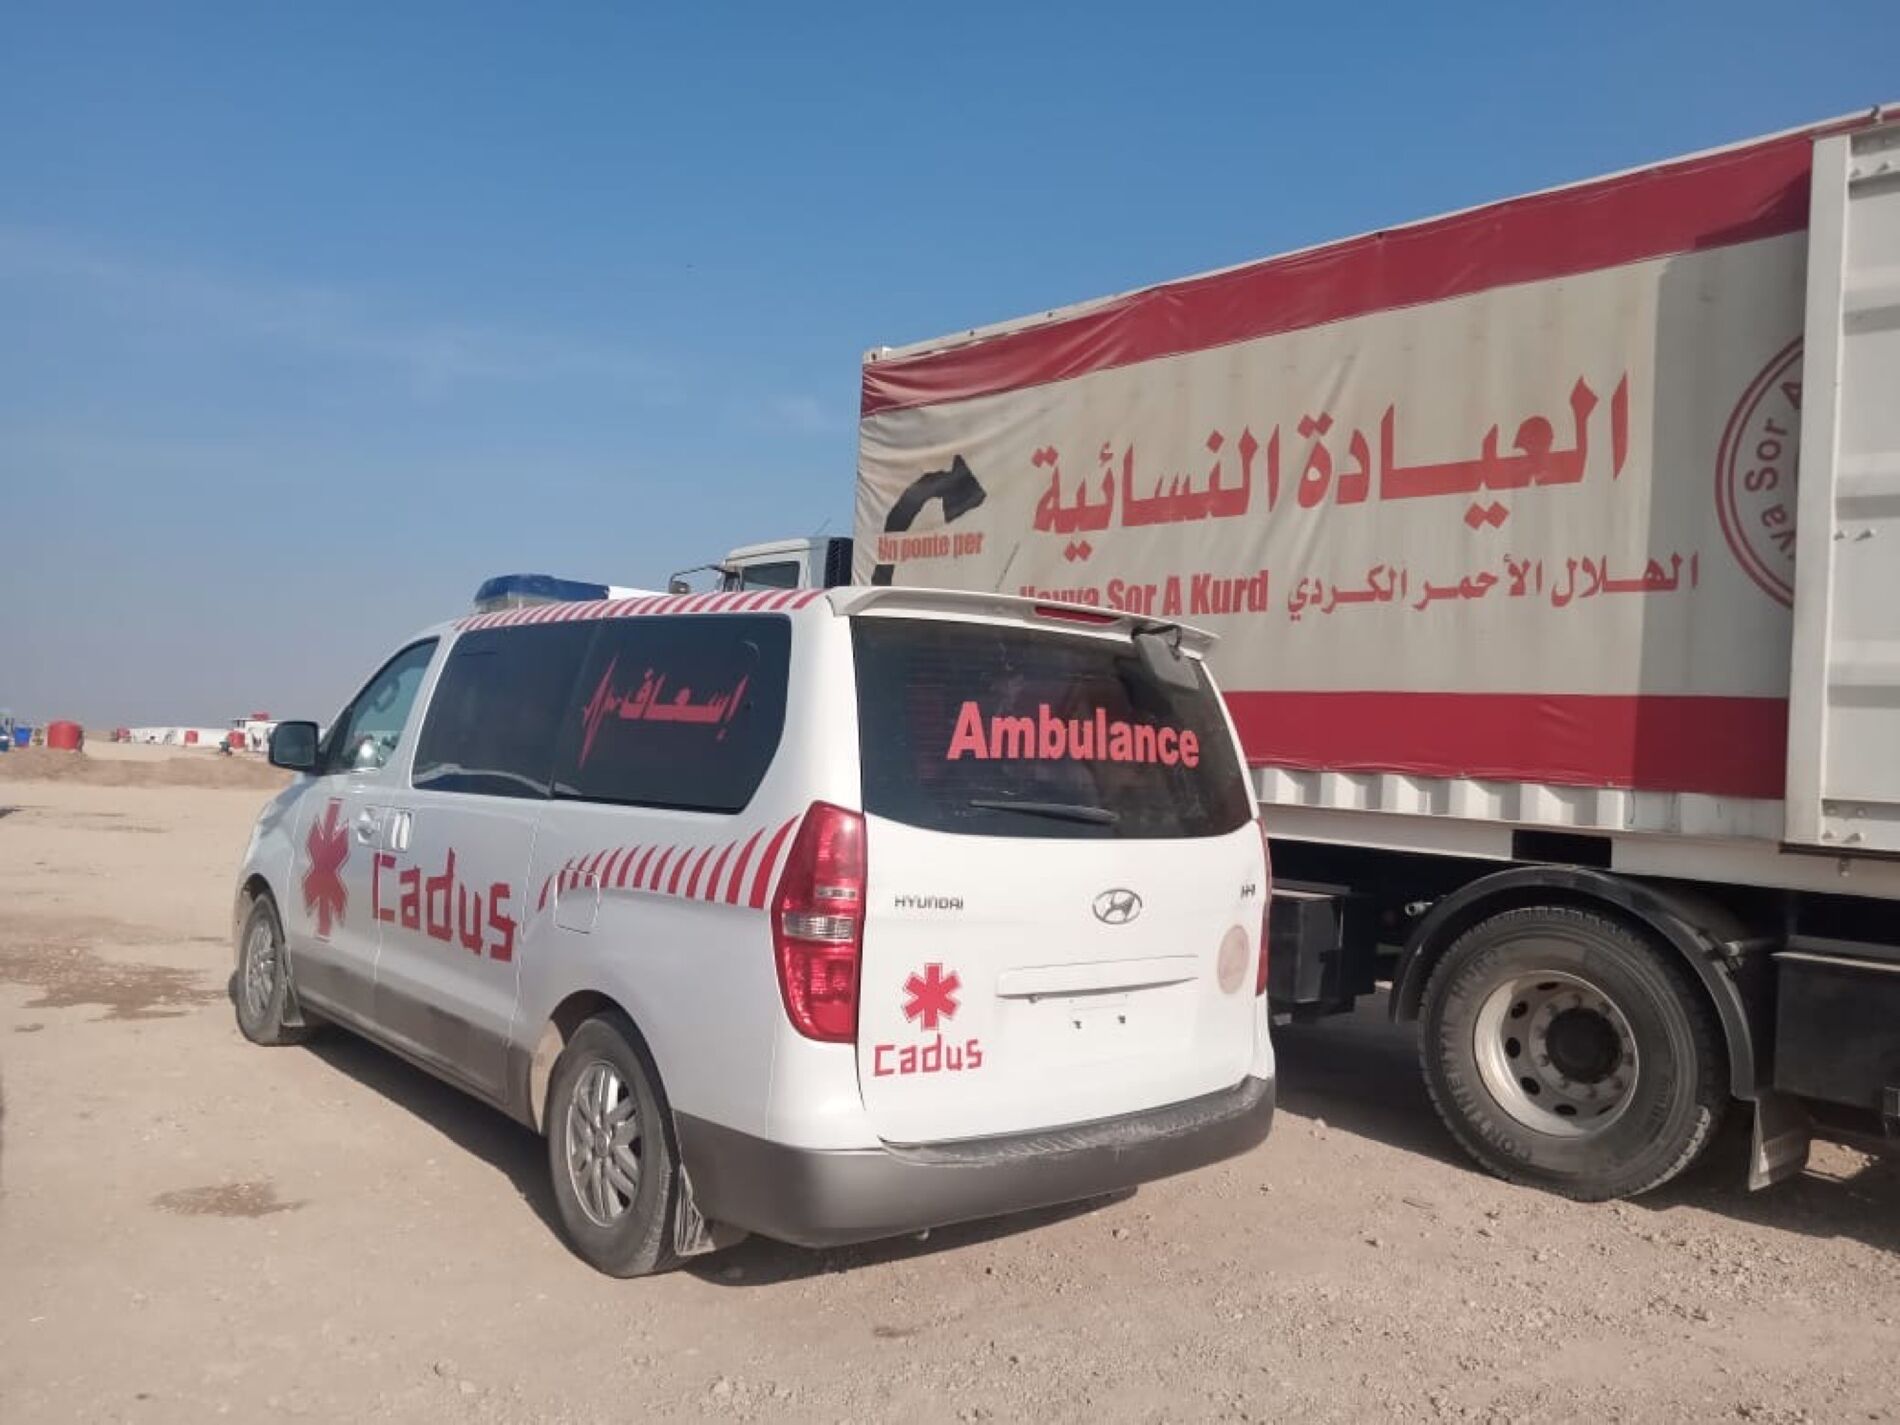 An ambulace from CADUS in front of a truck from Heyva Sor at Tal Tamr.